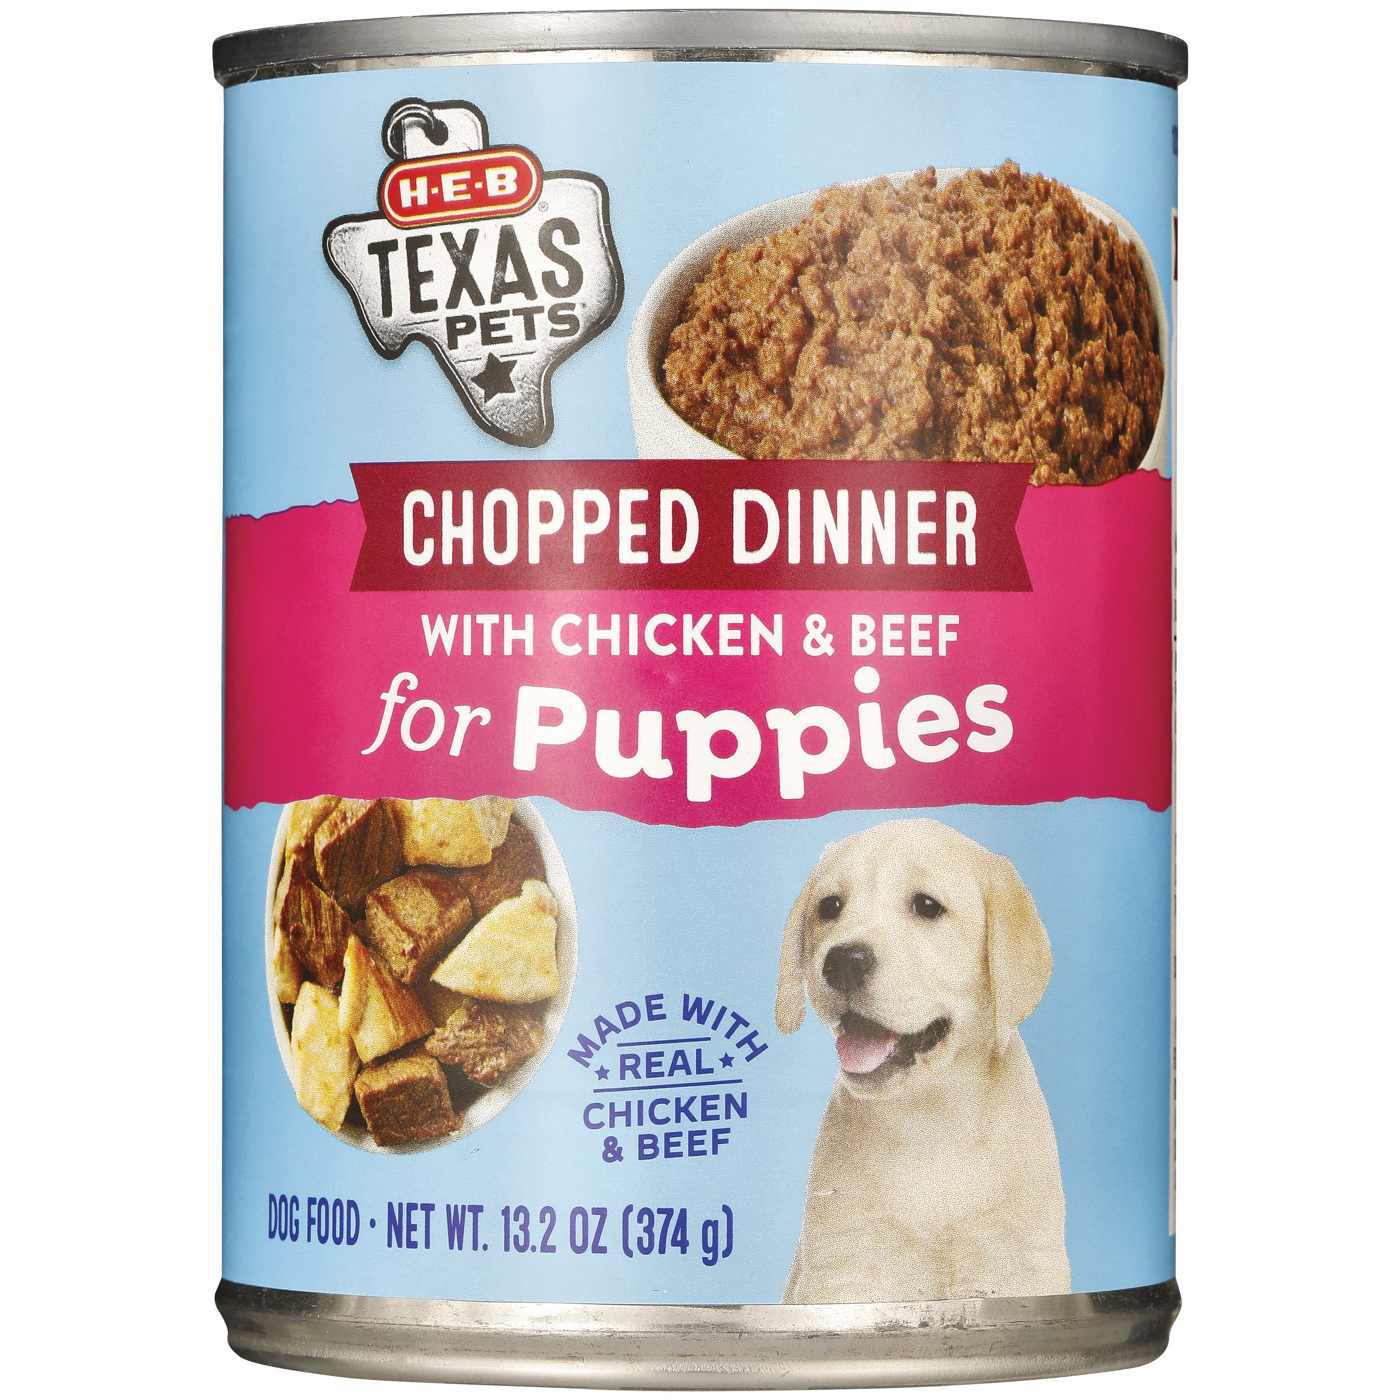 H-E-B Texas Pets Chopped Chicken & Beef Wet Puppy Food; image 1 of 2